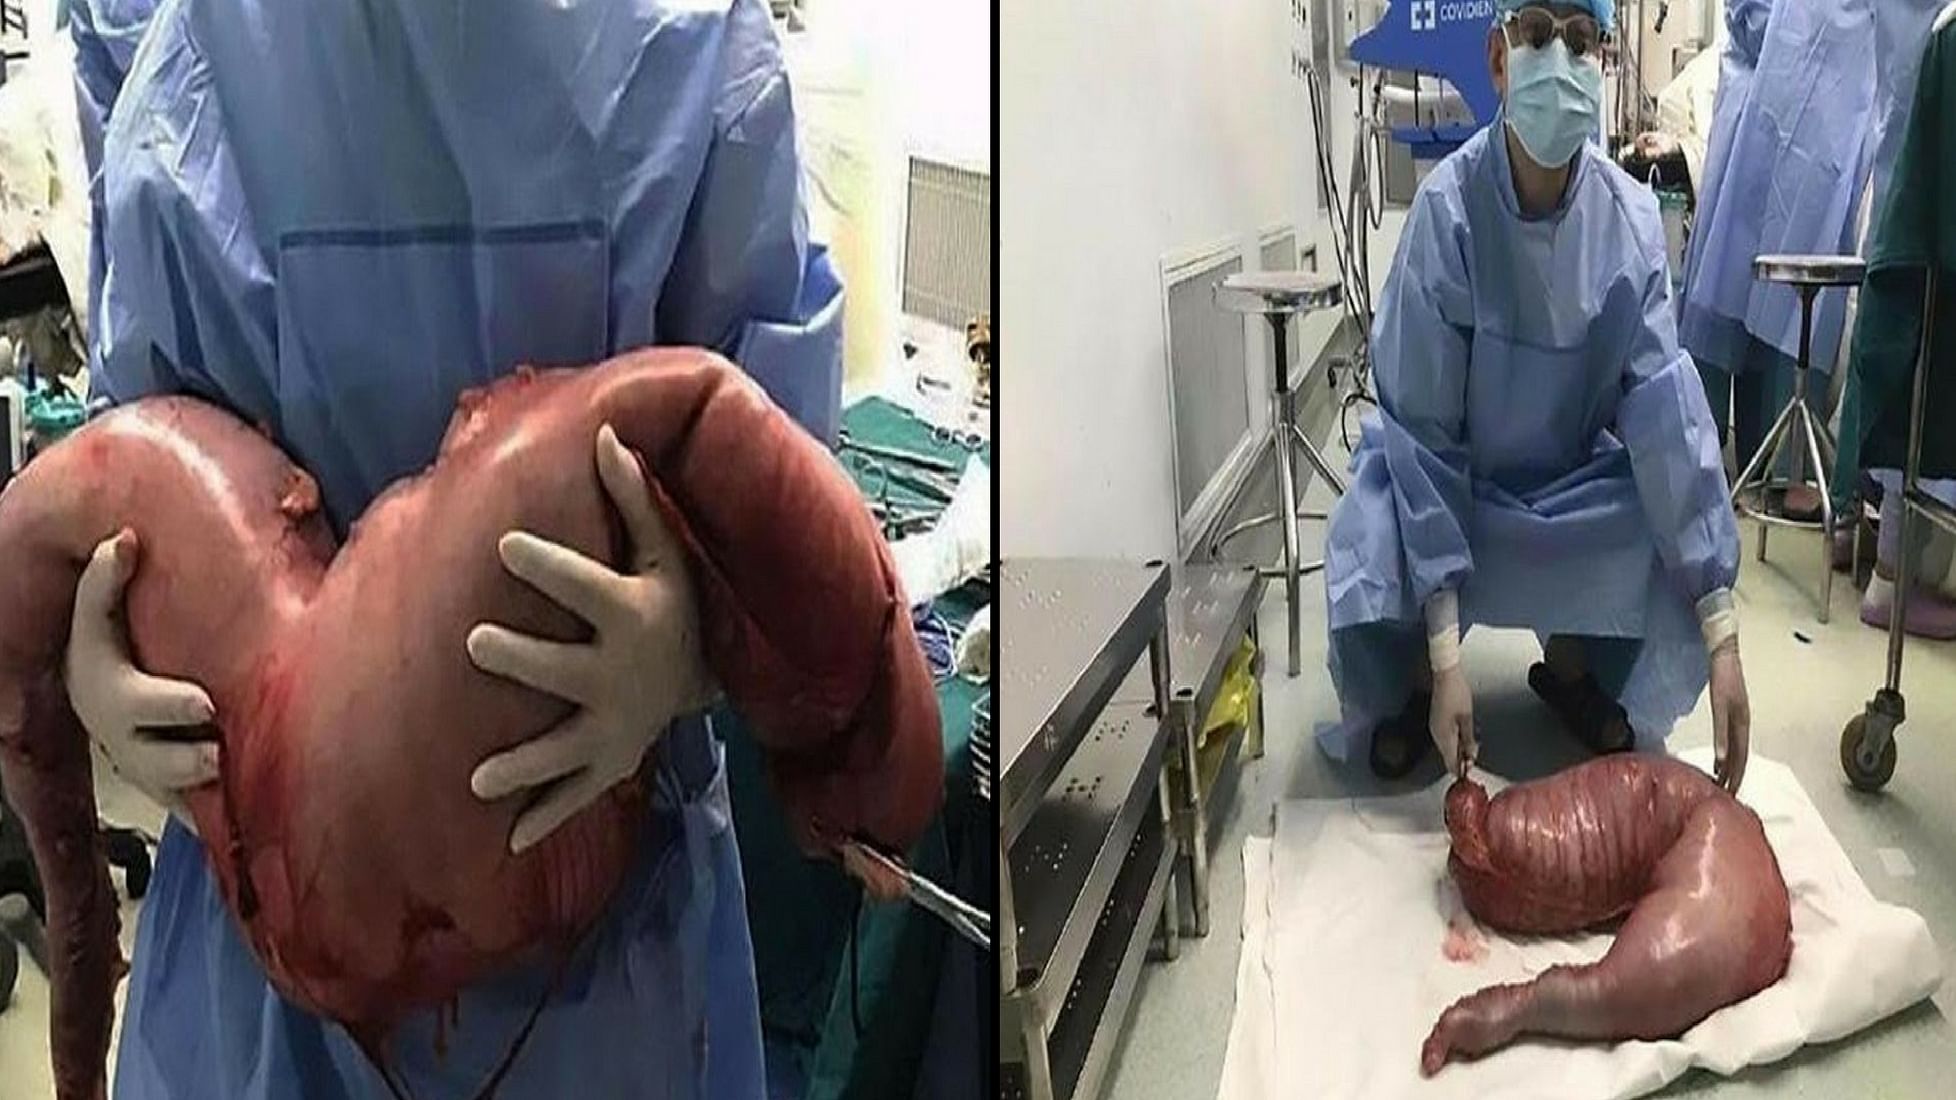 A man constipated for 22 years gets 13 kg of poop surgically removed in China. (Photo: <a href="https://www.inverse.com/article/32839-constipated-man-china-feces-poop-hirschsprung-disease">Inverse</a>)&nbsp;